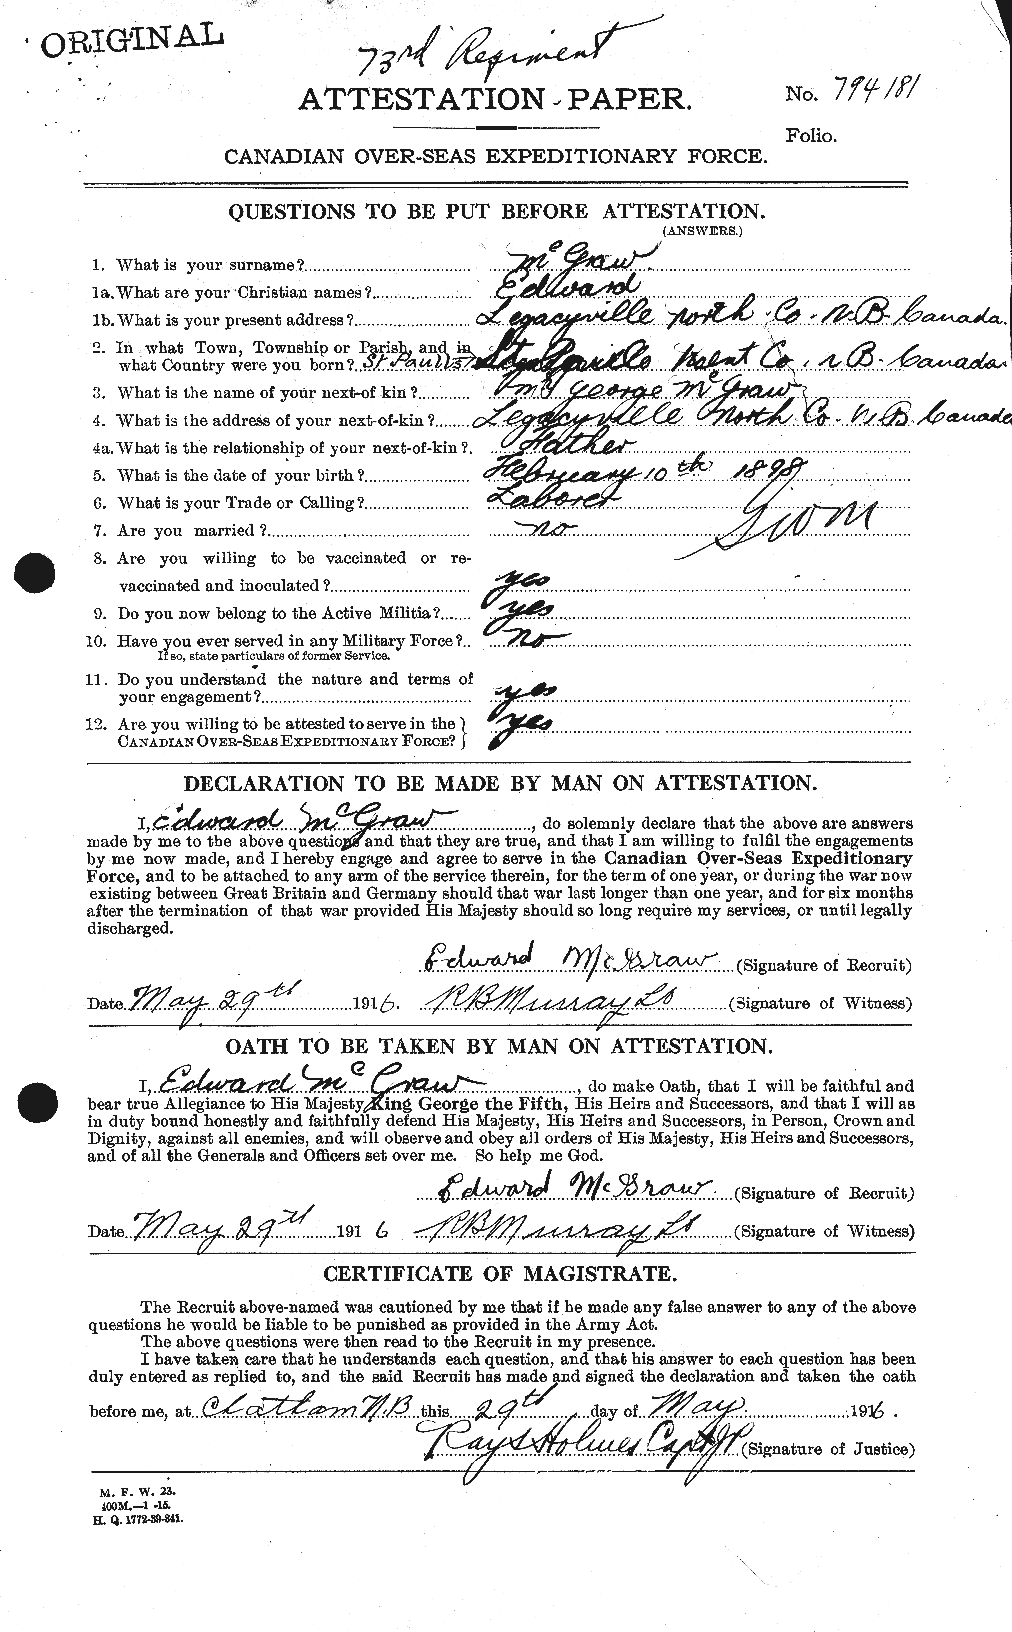 Personnel Records of the First World War - CEF 523721a